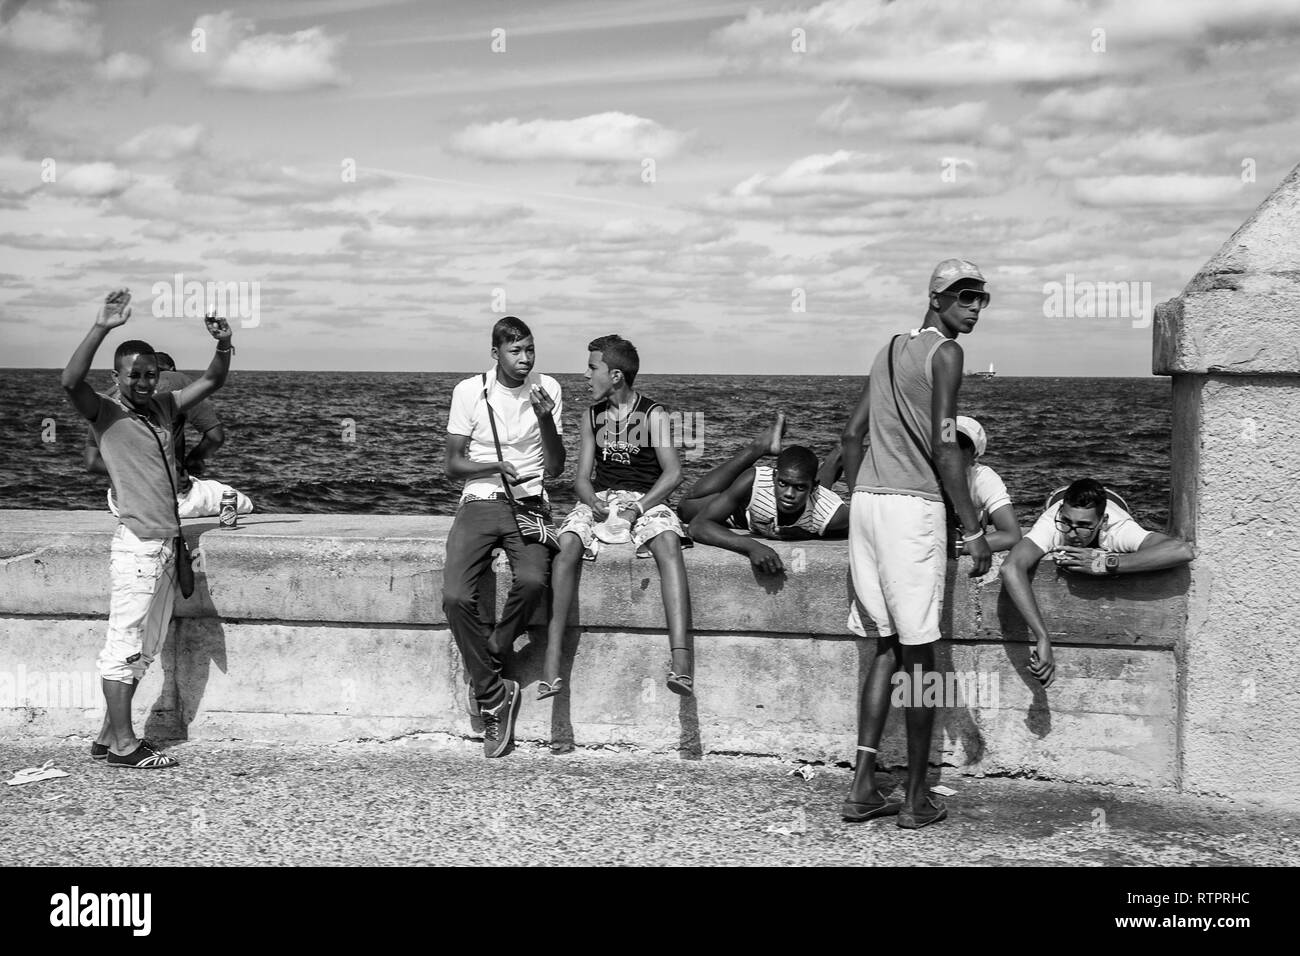 Havana, Cuba - 22 January 2013: A view of the streets of the city with cuban people. A group of teenagers relaxed on seawall malecon. Stock Photo